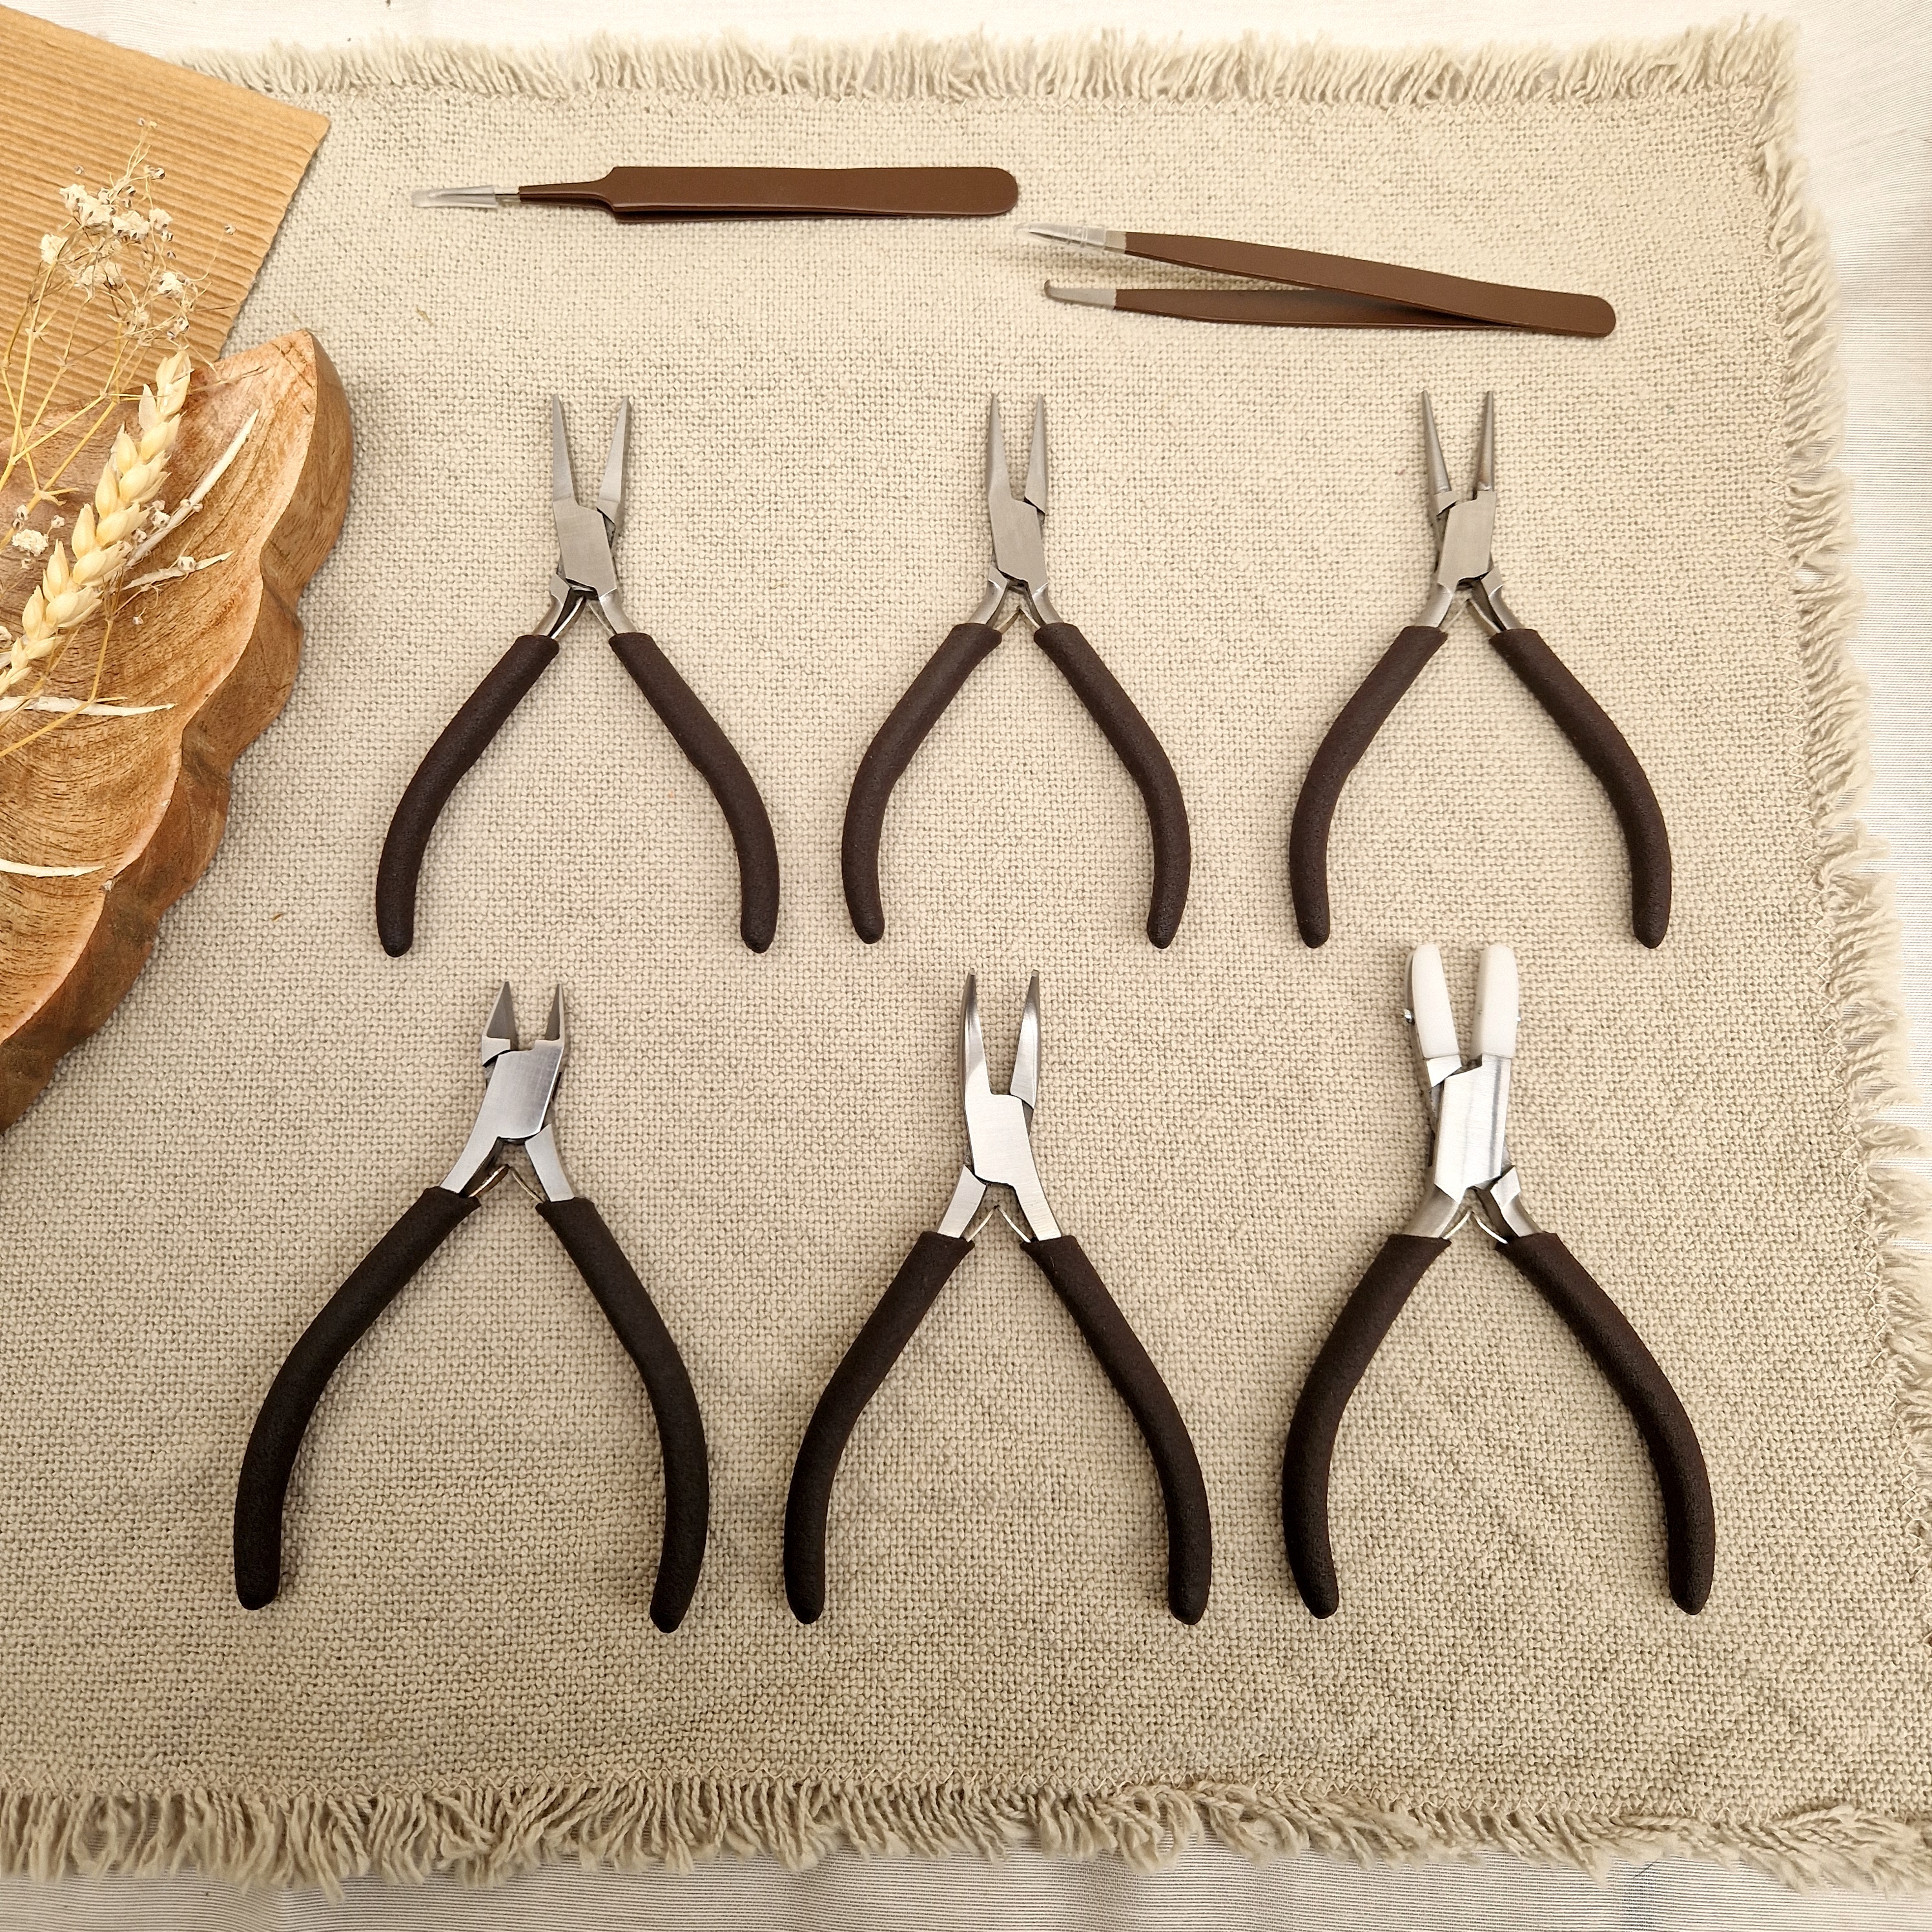 Extra pictures Beader tool set  - with 8 pliers - brown